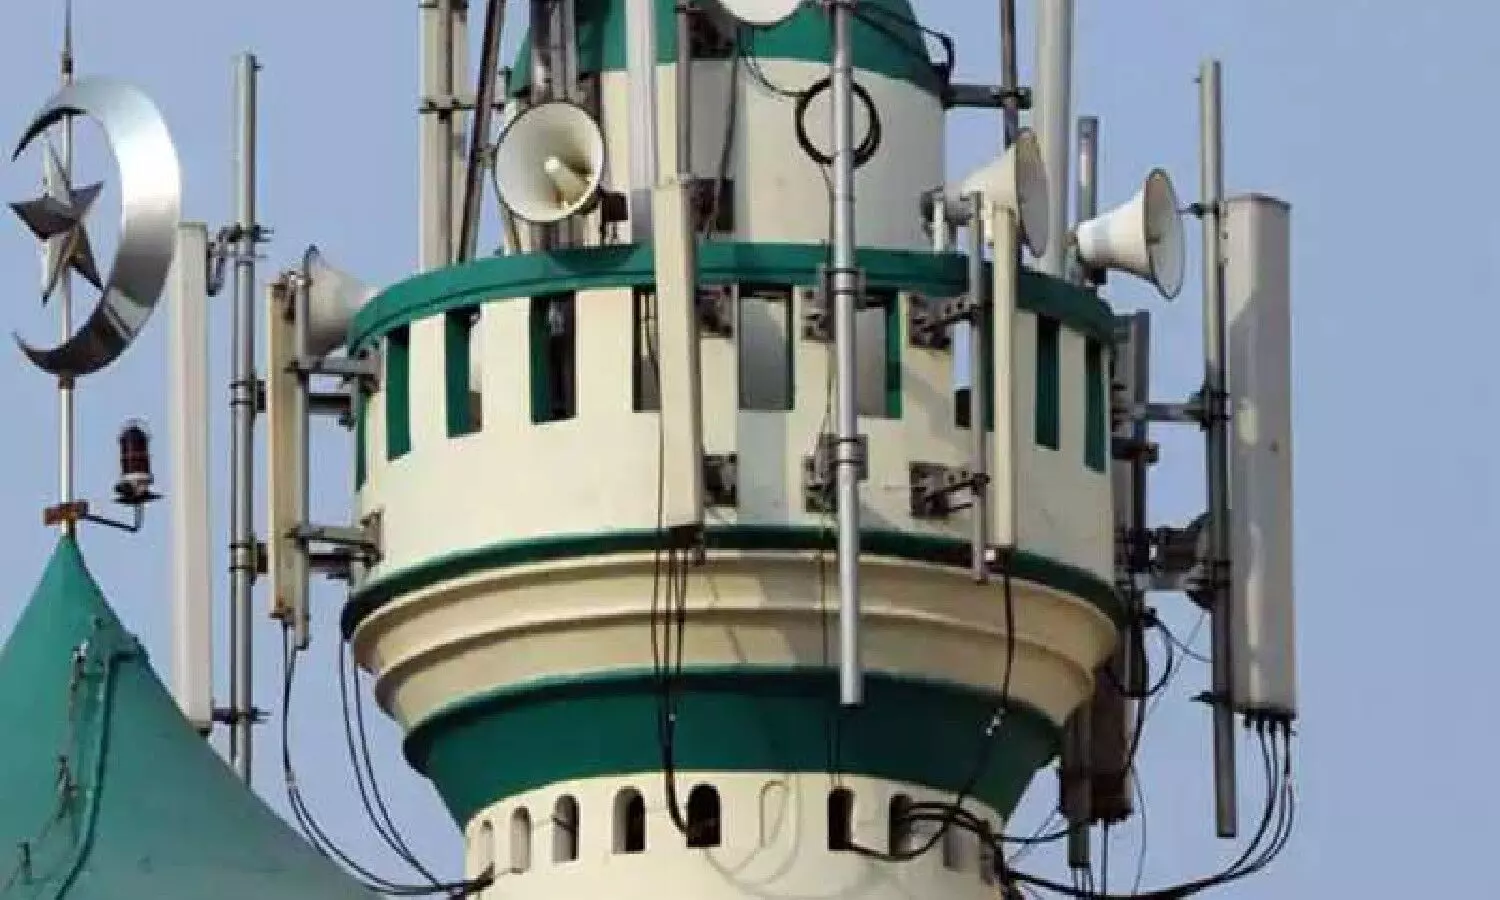 Saudi Arabia has defended its decision to keep the noise of loudspeakers in mosques low.